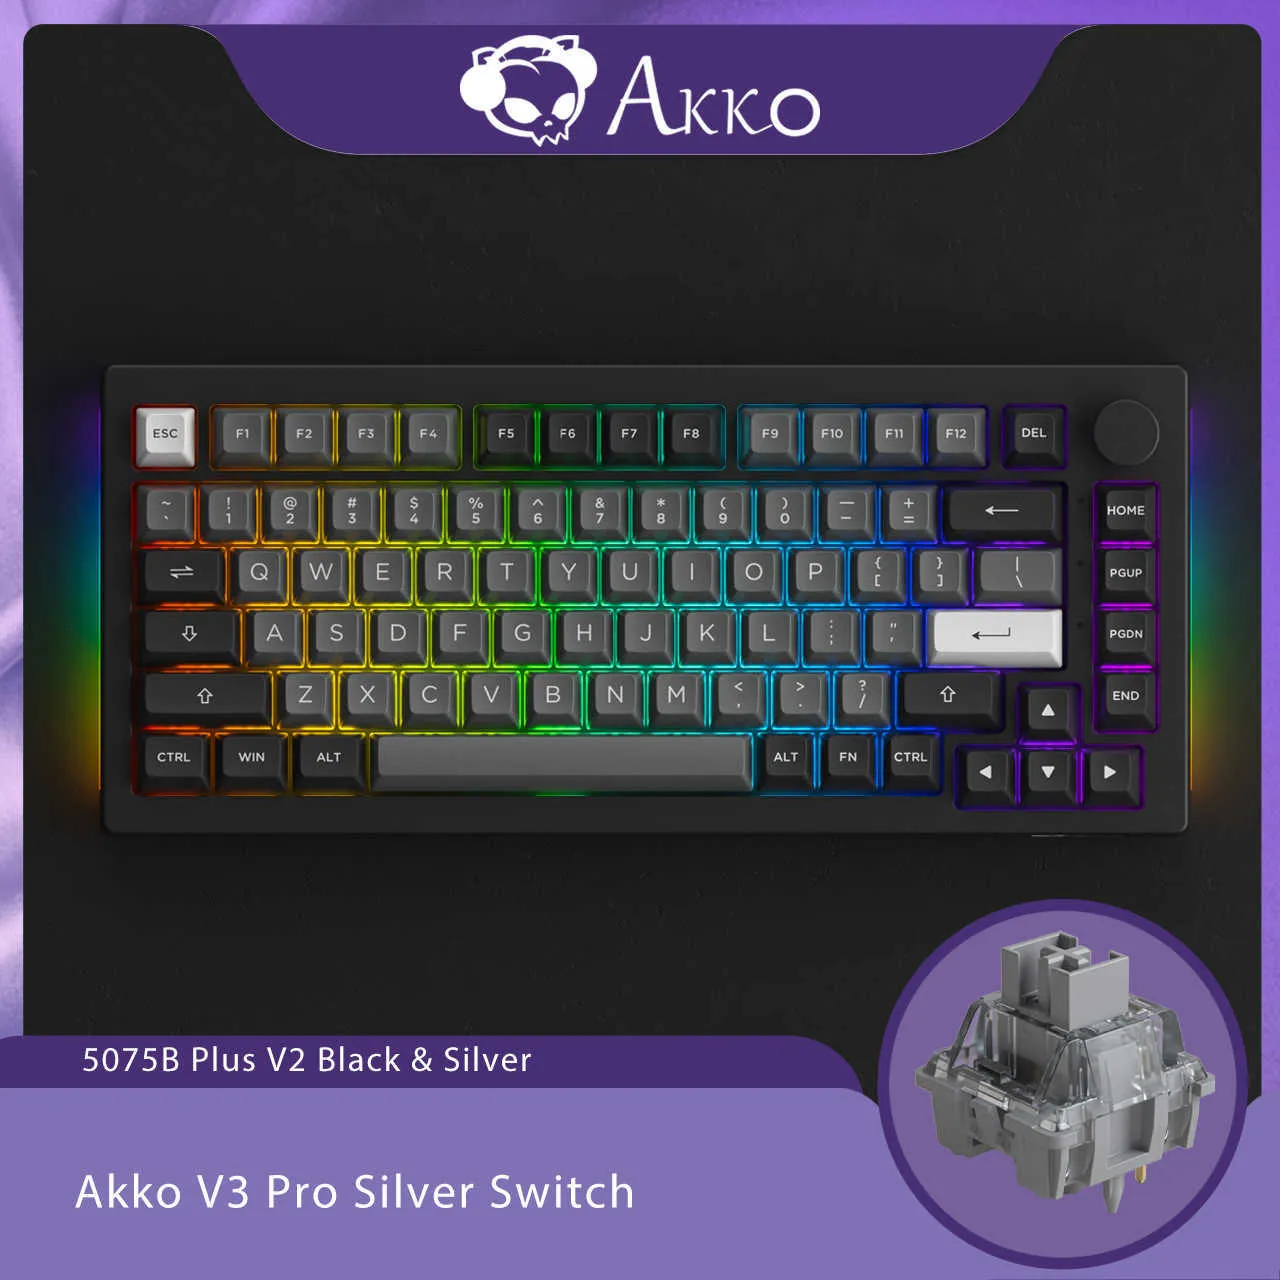 Seek a better typing experience with Akko's 5075B Plus wireless